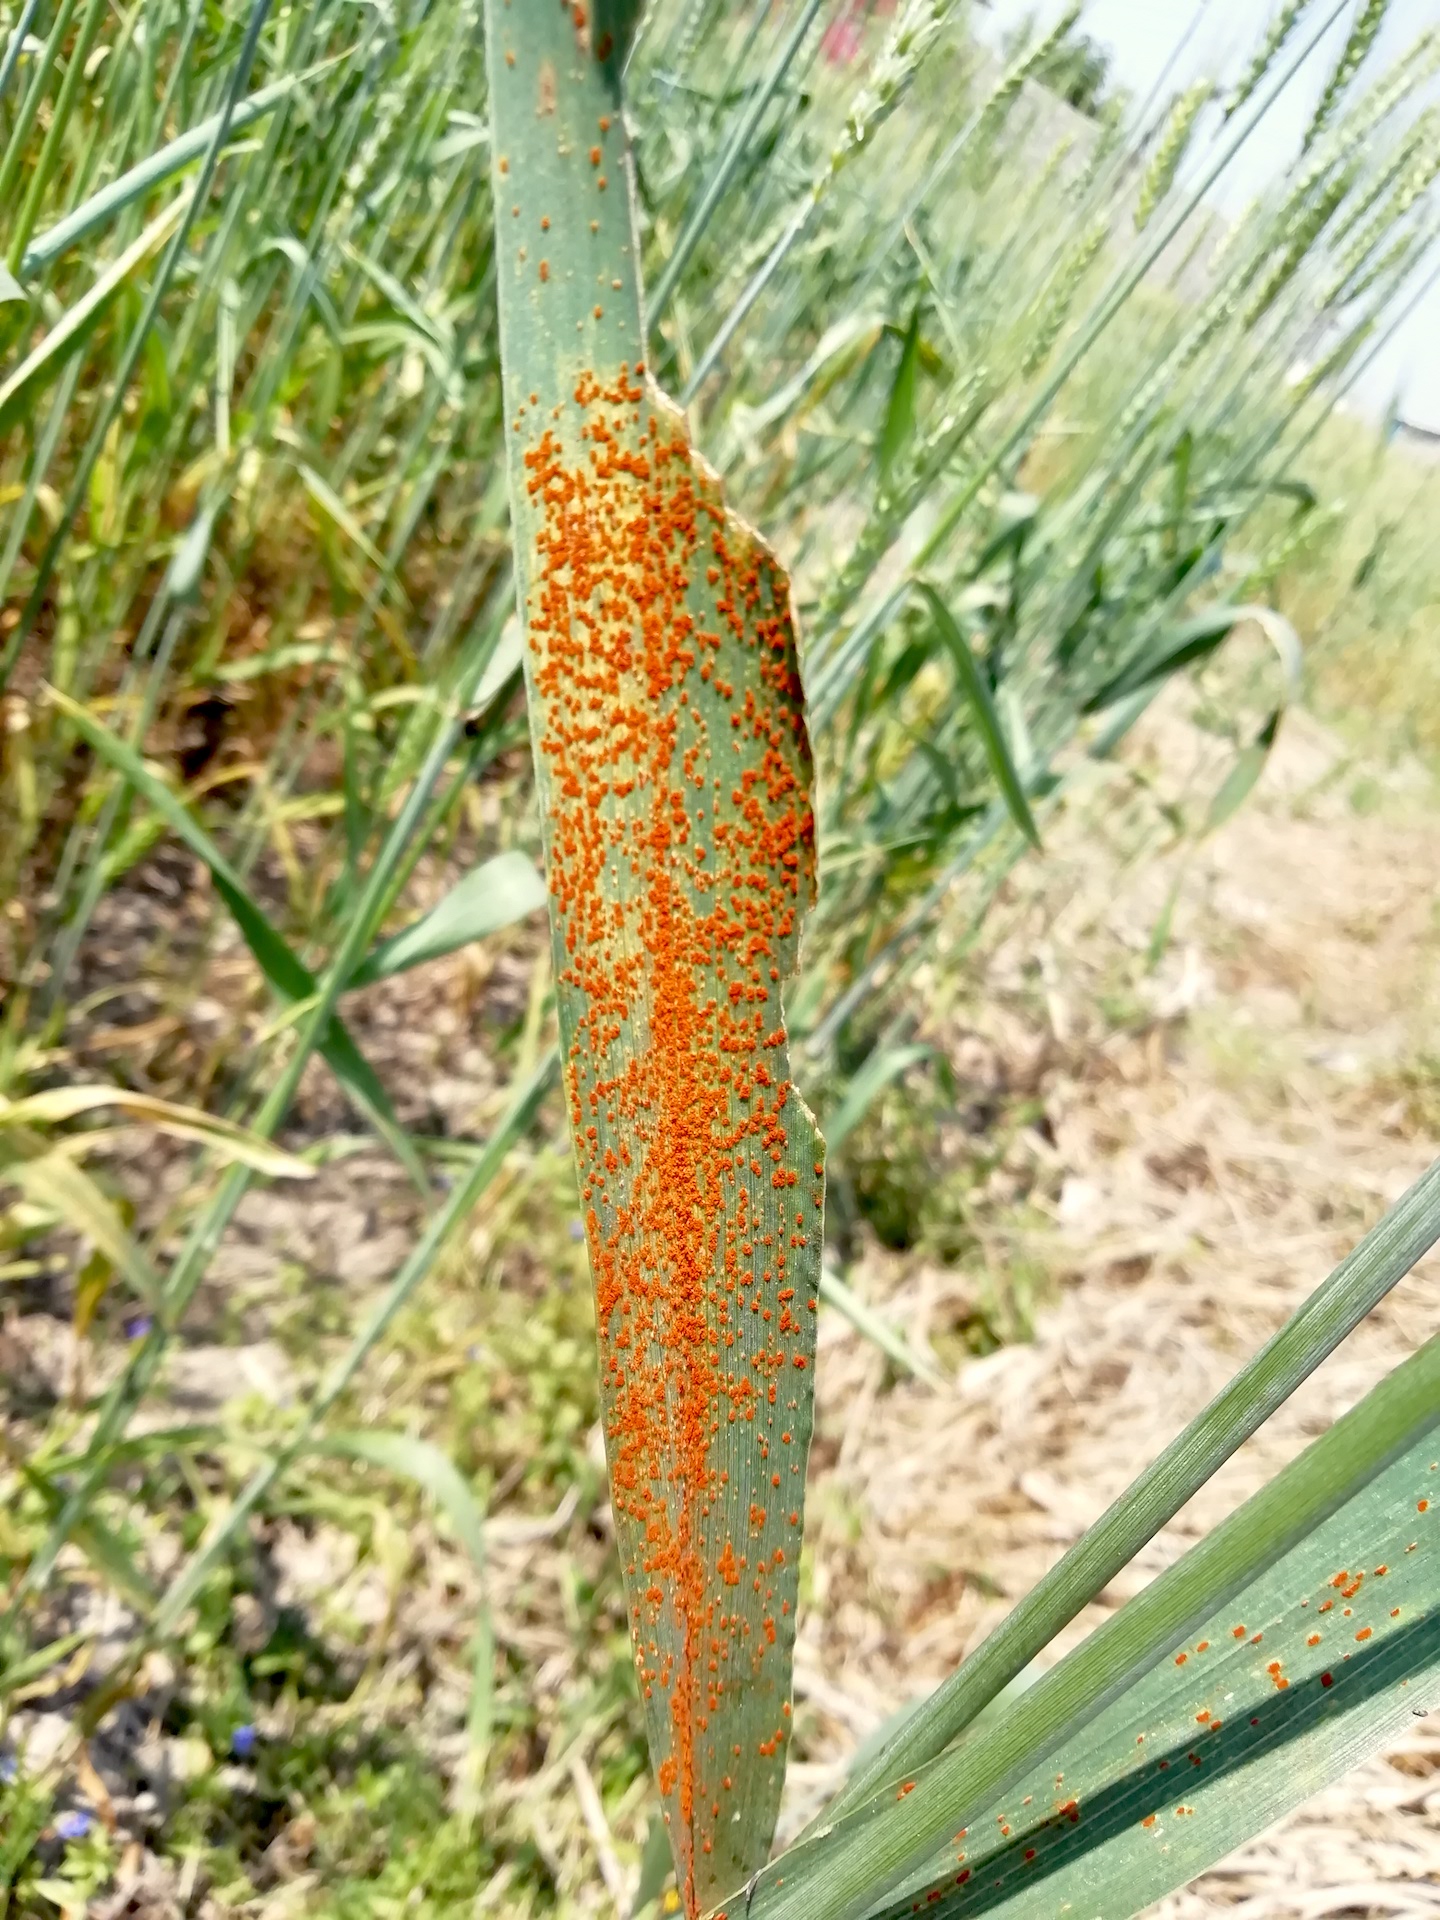 Wheat leaf rust can be spotted on a wheat plant of a highly susceptible variety in Nepal. The symptoms of wheat rust are dusty, reddish-orange to reddish-brown fruiting bodies that appear on the leaf surface. These lesions produce numerous spores, which are spread by wind and splashing water. (Photo: D Hodson/CIMMYT)